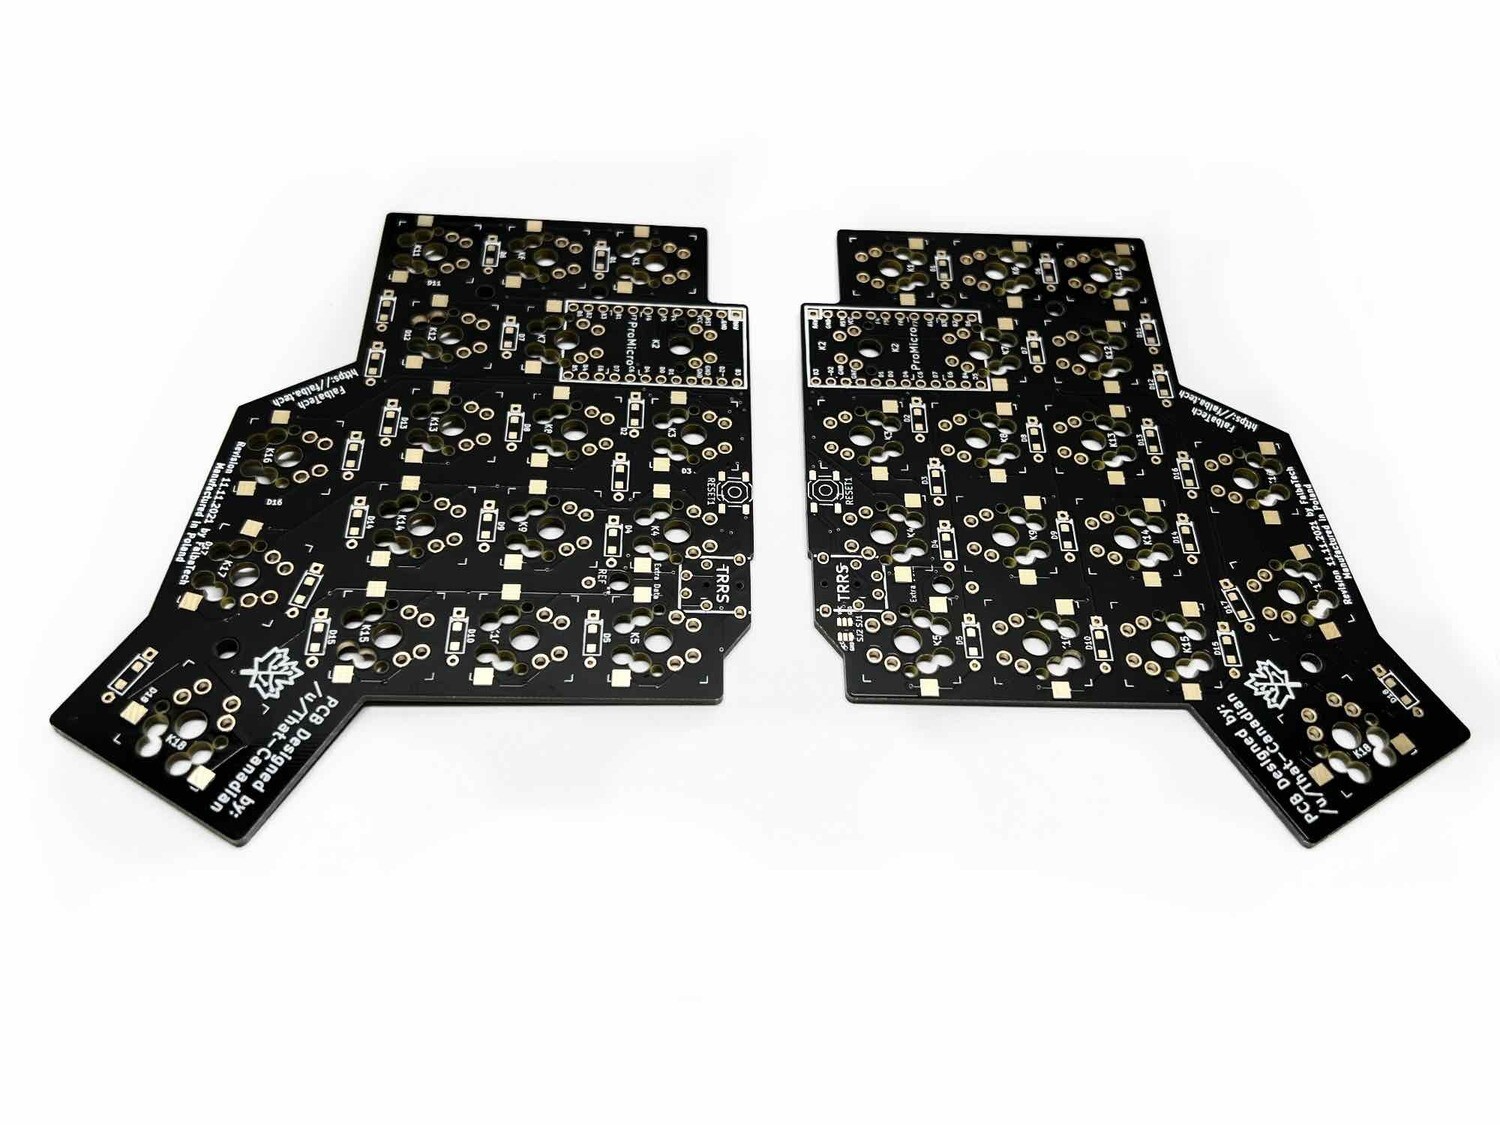 MiniDox PCB Electrical Boards (Set of 2)